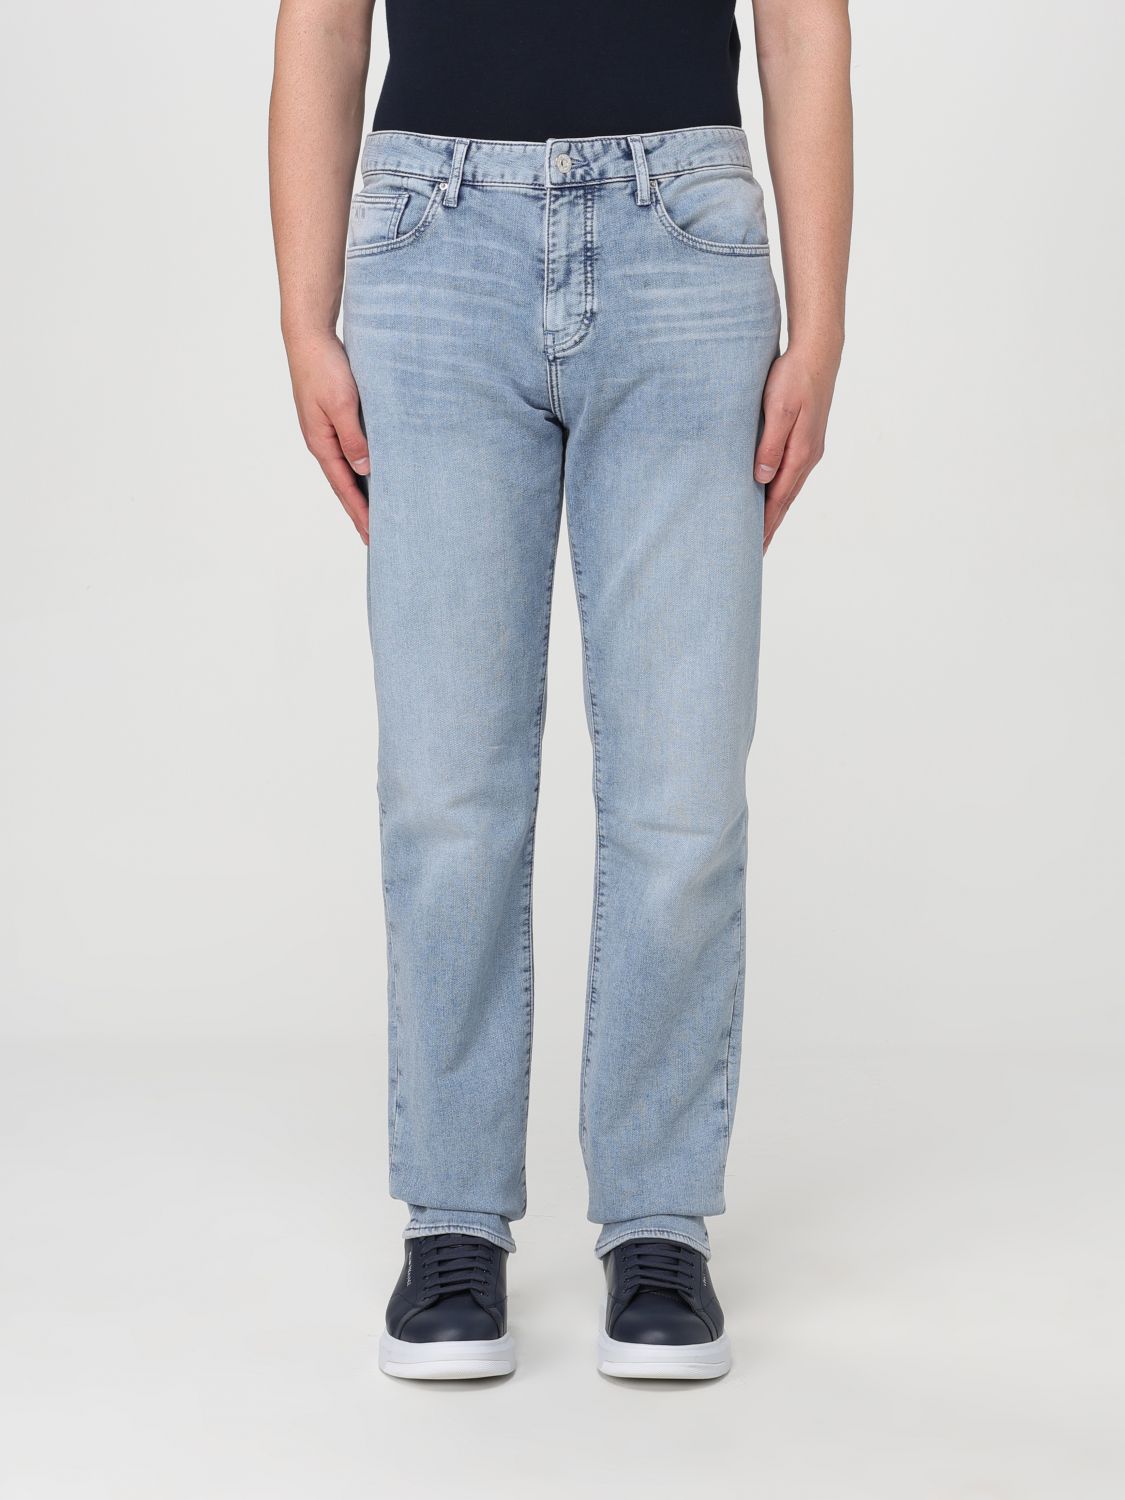 Armani Exchange Jeans  Men In Stone Washed